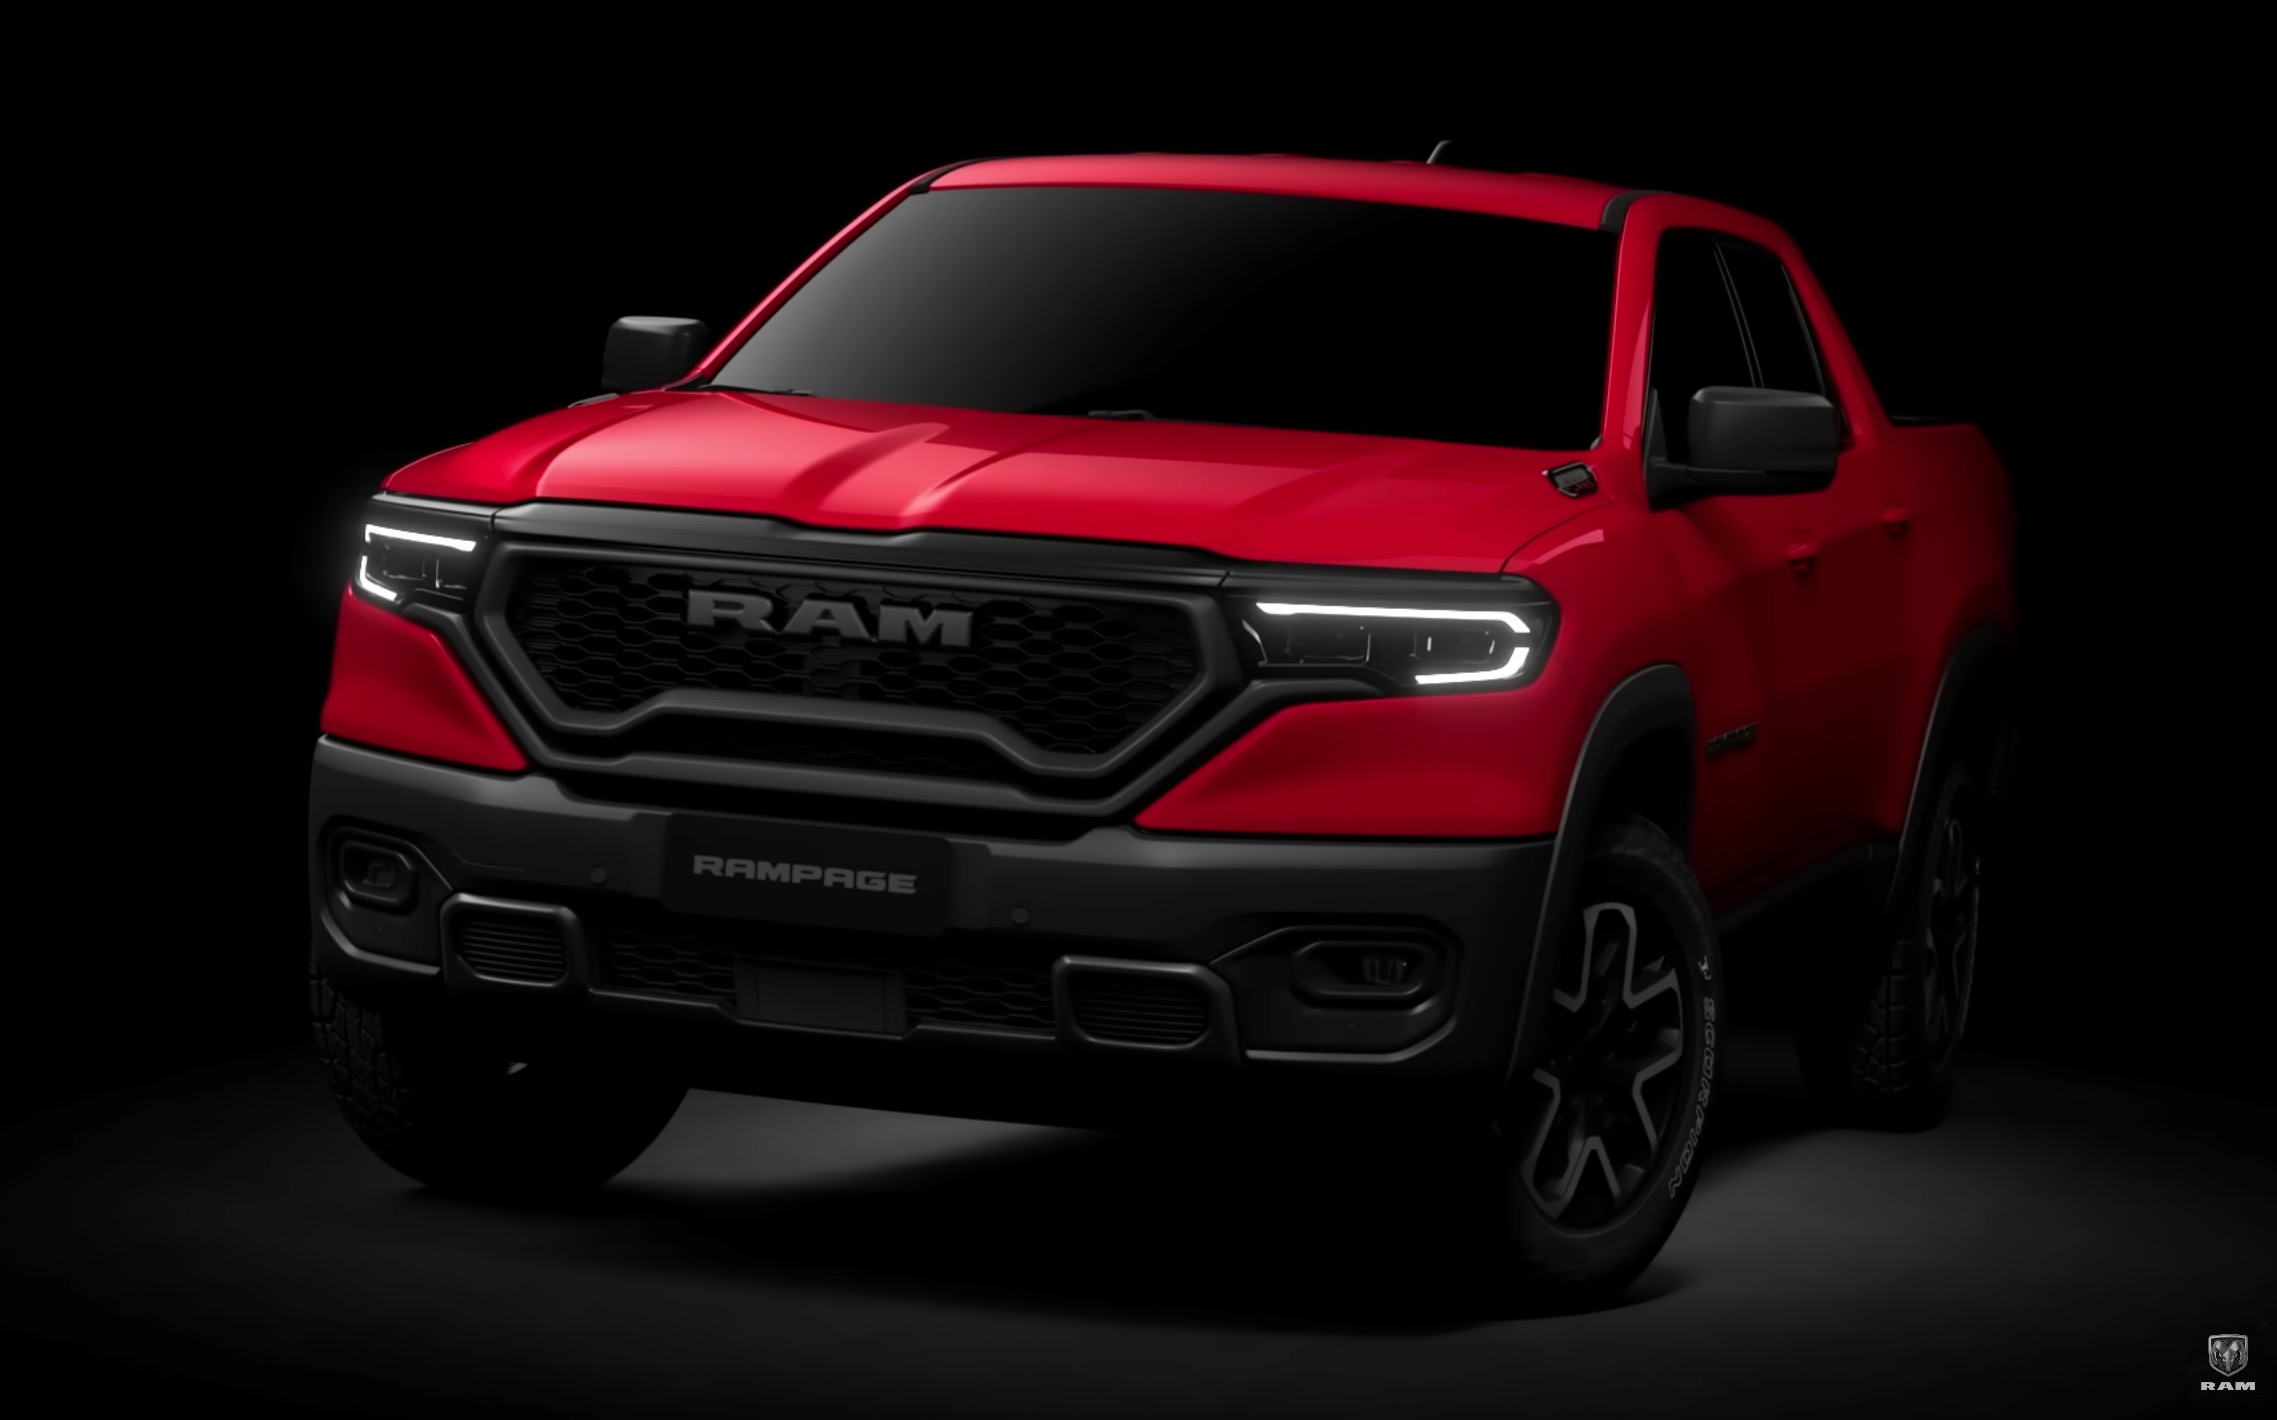 Stellantis previews new HiLux size ute: RAM Rampage, set for South America